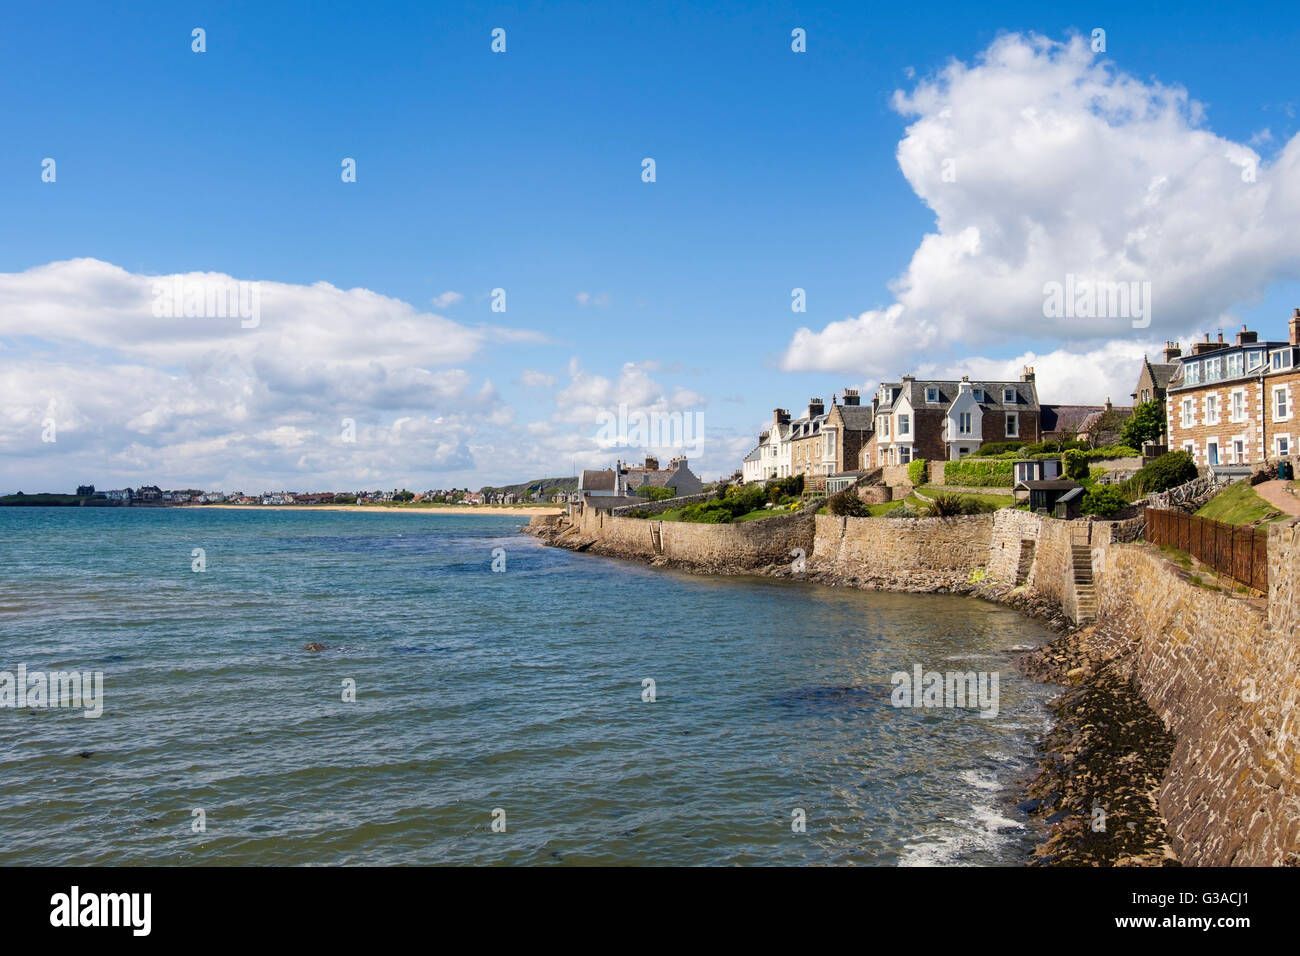 Seafront buildings in village overlooking sea on Firth of Forth coast Elie and Earlsferry East Neuk Fife Scotland UK Britain Stock Photo